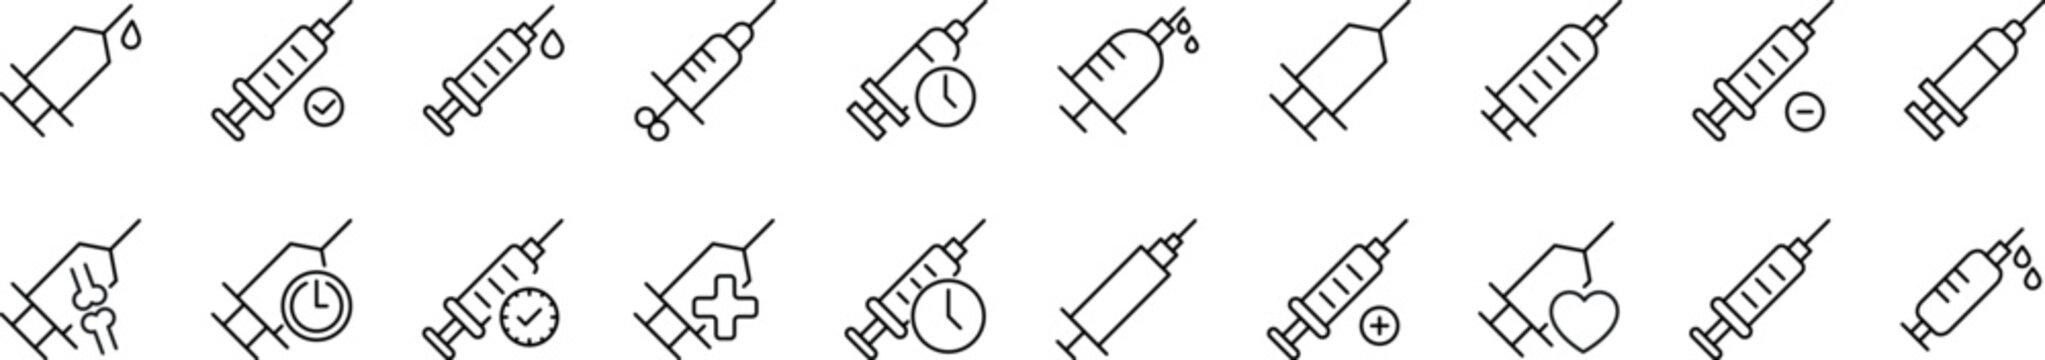 Set of line icons of syringe. Editable stroke. Simple outline sign for web sites, newspapers, articles book